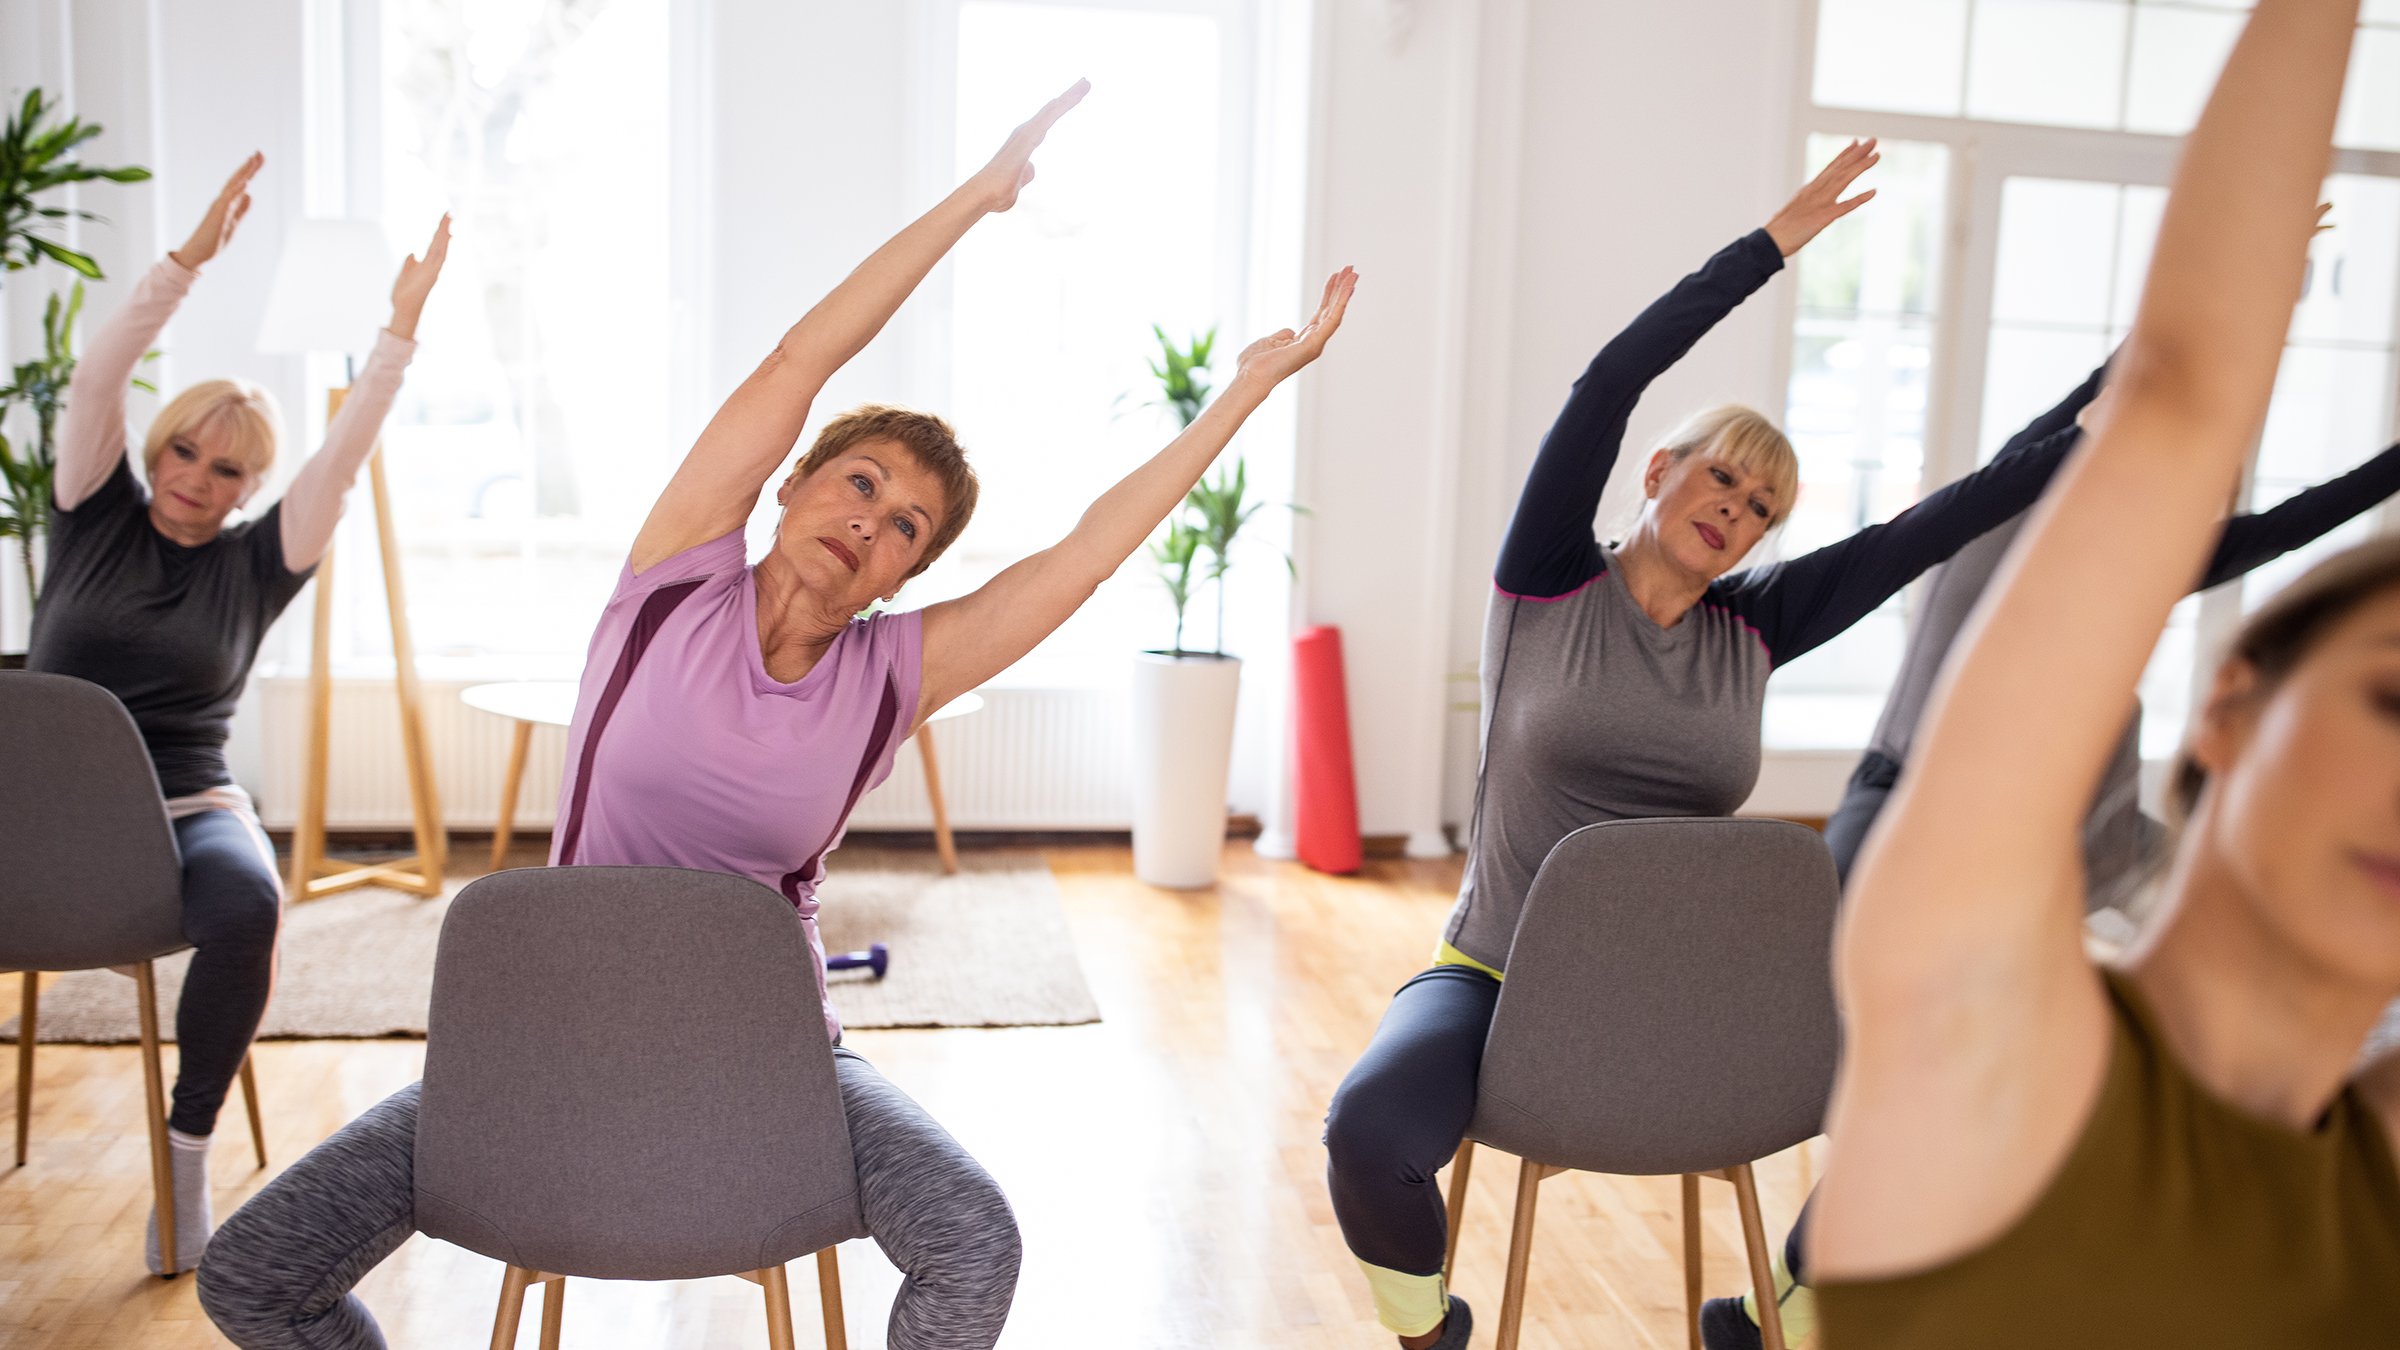 Sit and Stretch: Free Chair Yoga Exercises for Senior Wellness